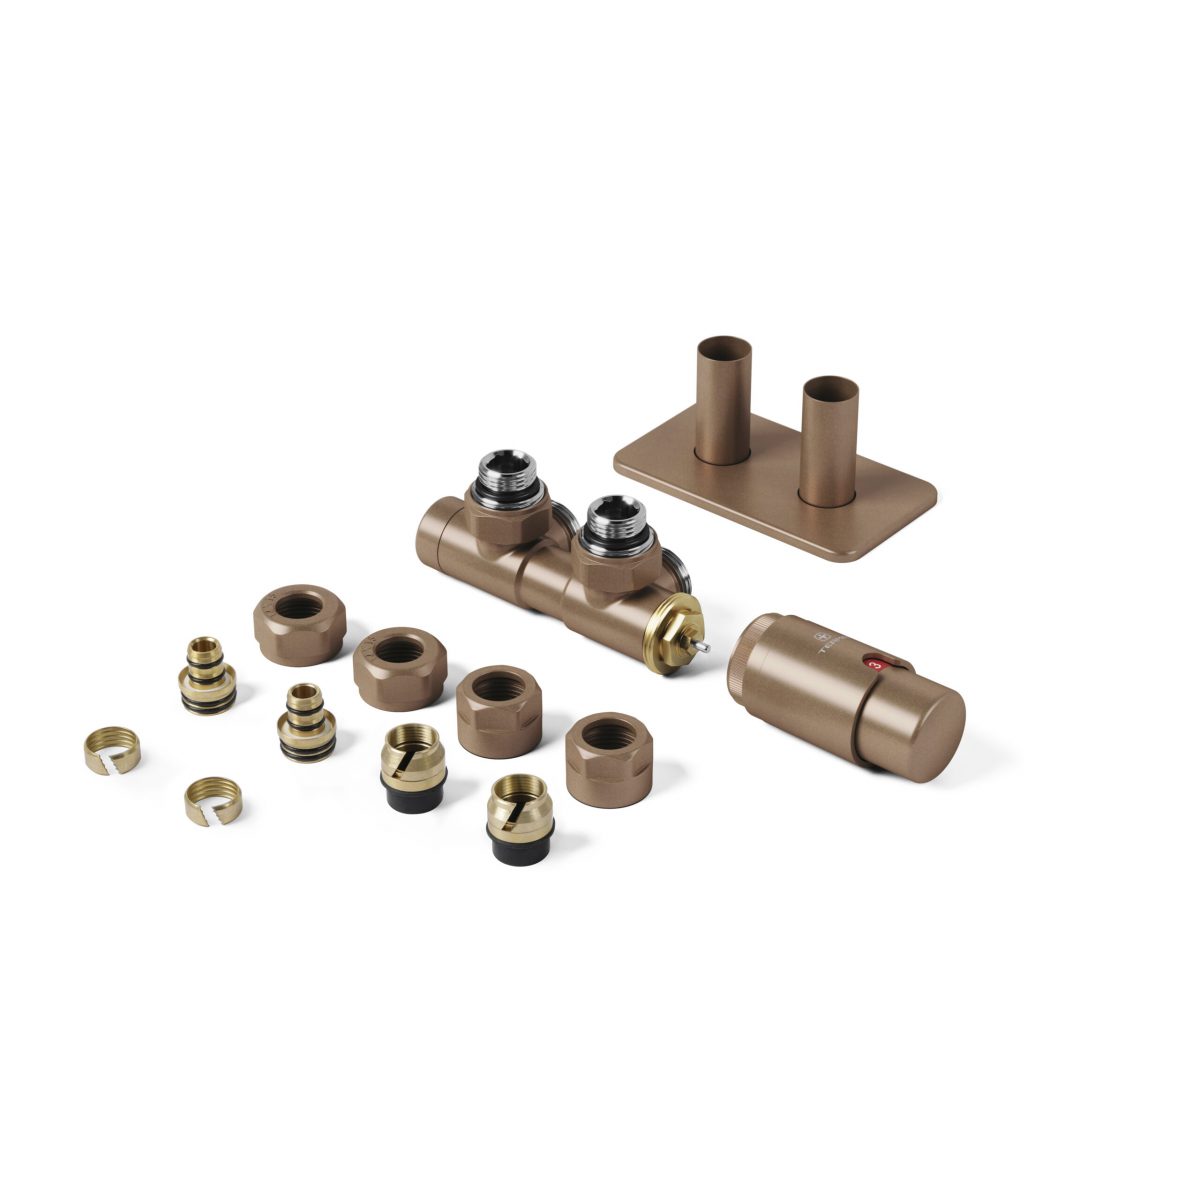 Terma Integrated Radiator Valve set 1/2 x 15 Right Sided Angled TRV Bright Copper